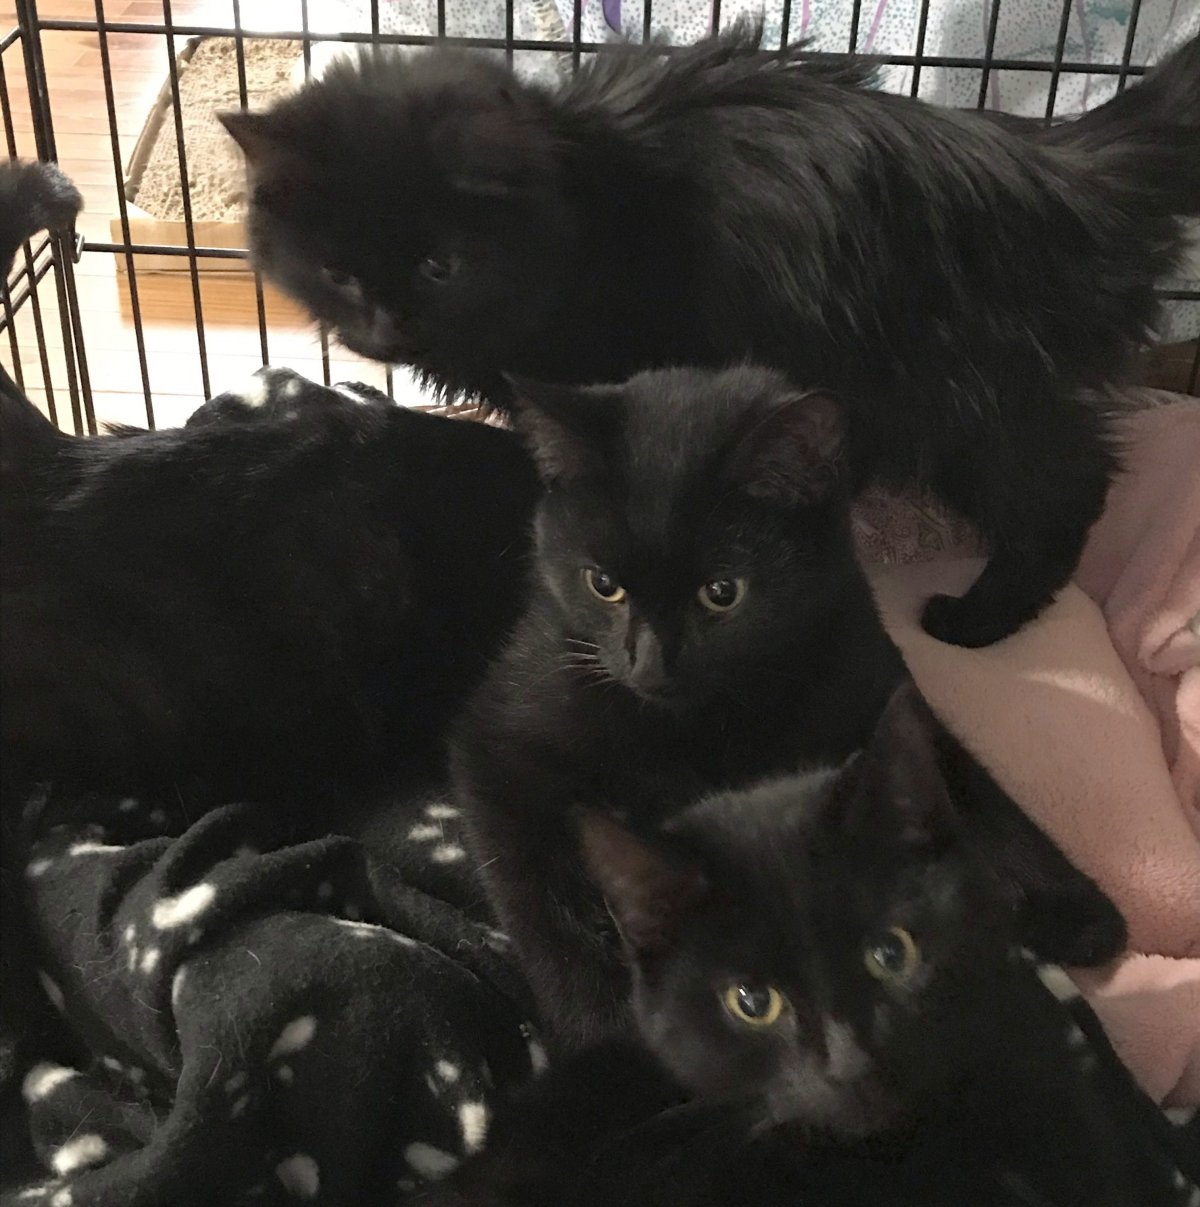 Kittens recovering after being rescued from the snow beside a western Newfoundland highway on Sunday are shown in a handout photo.